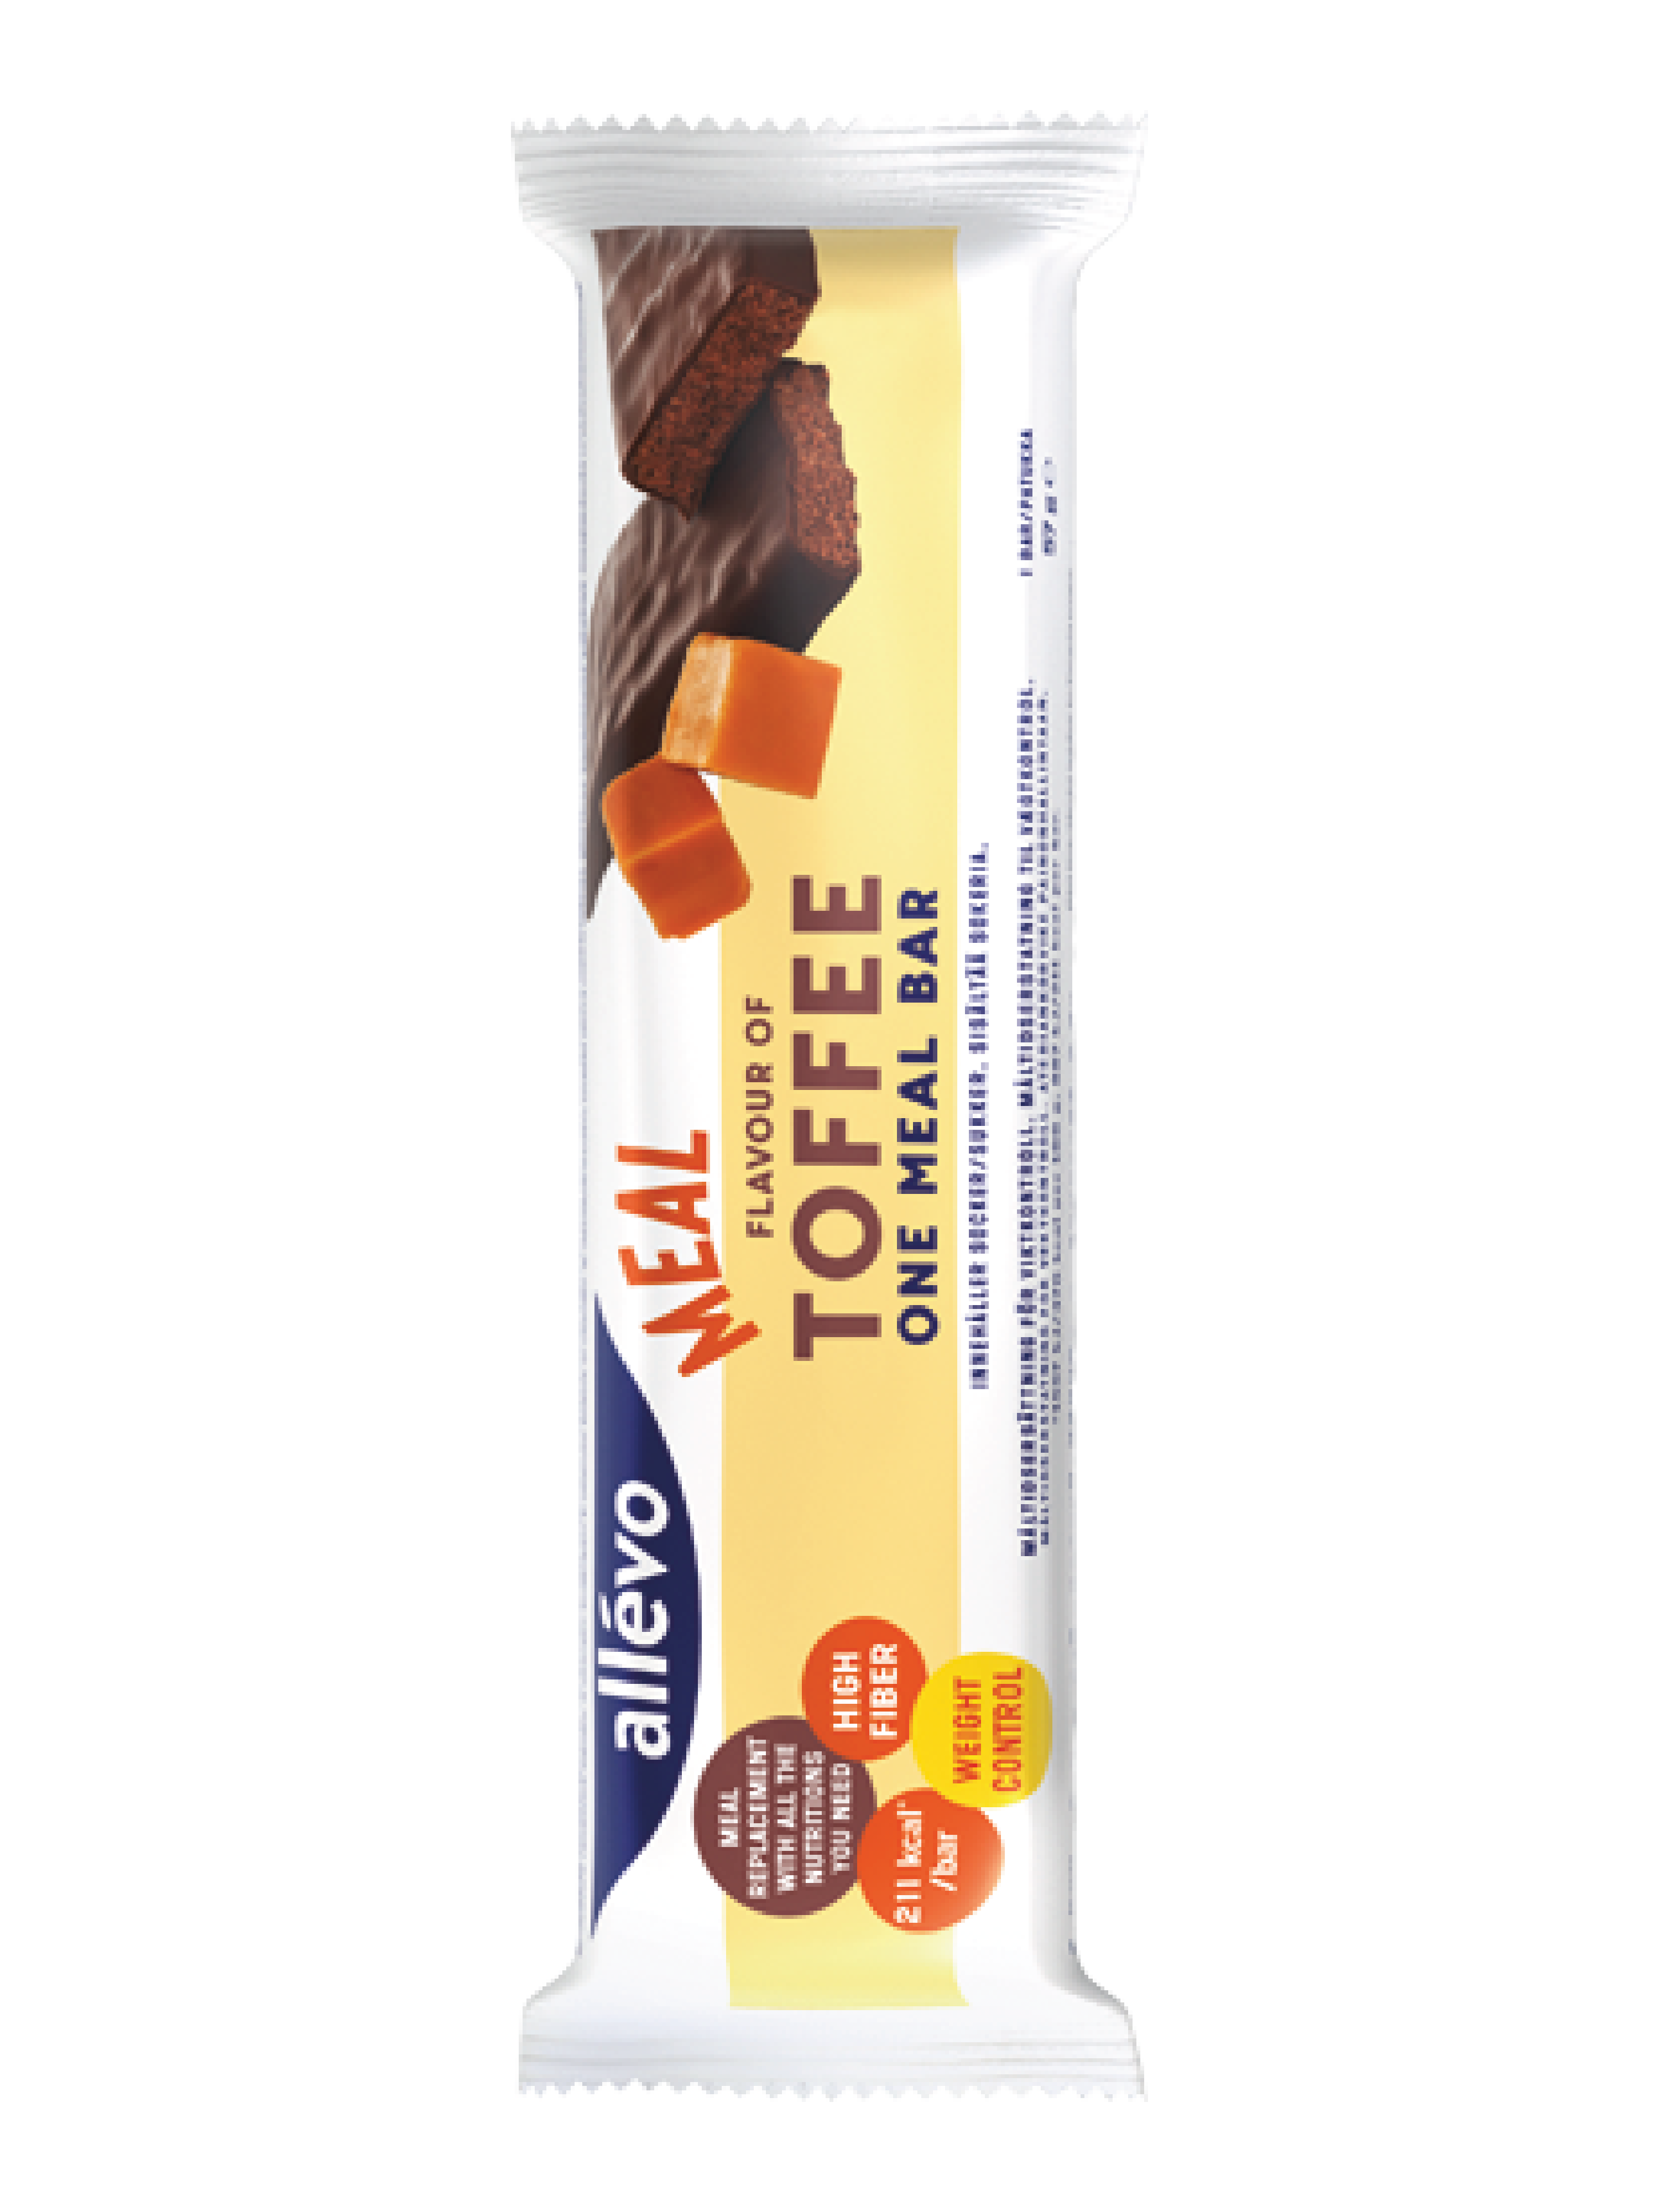 Allevo One Meal Toffee, Toffee, 57 gram